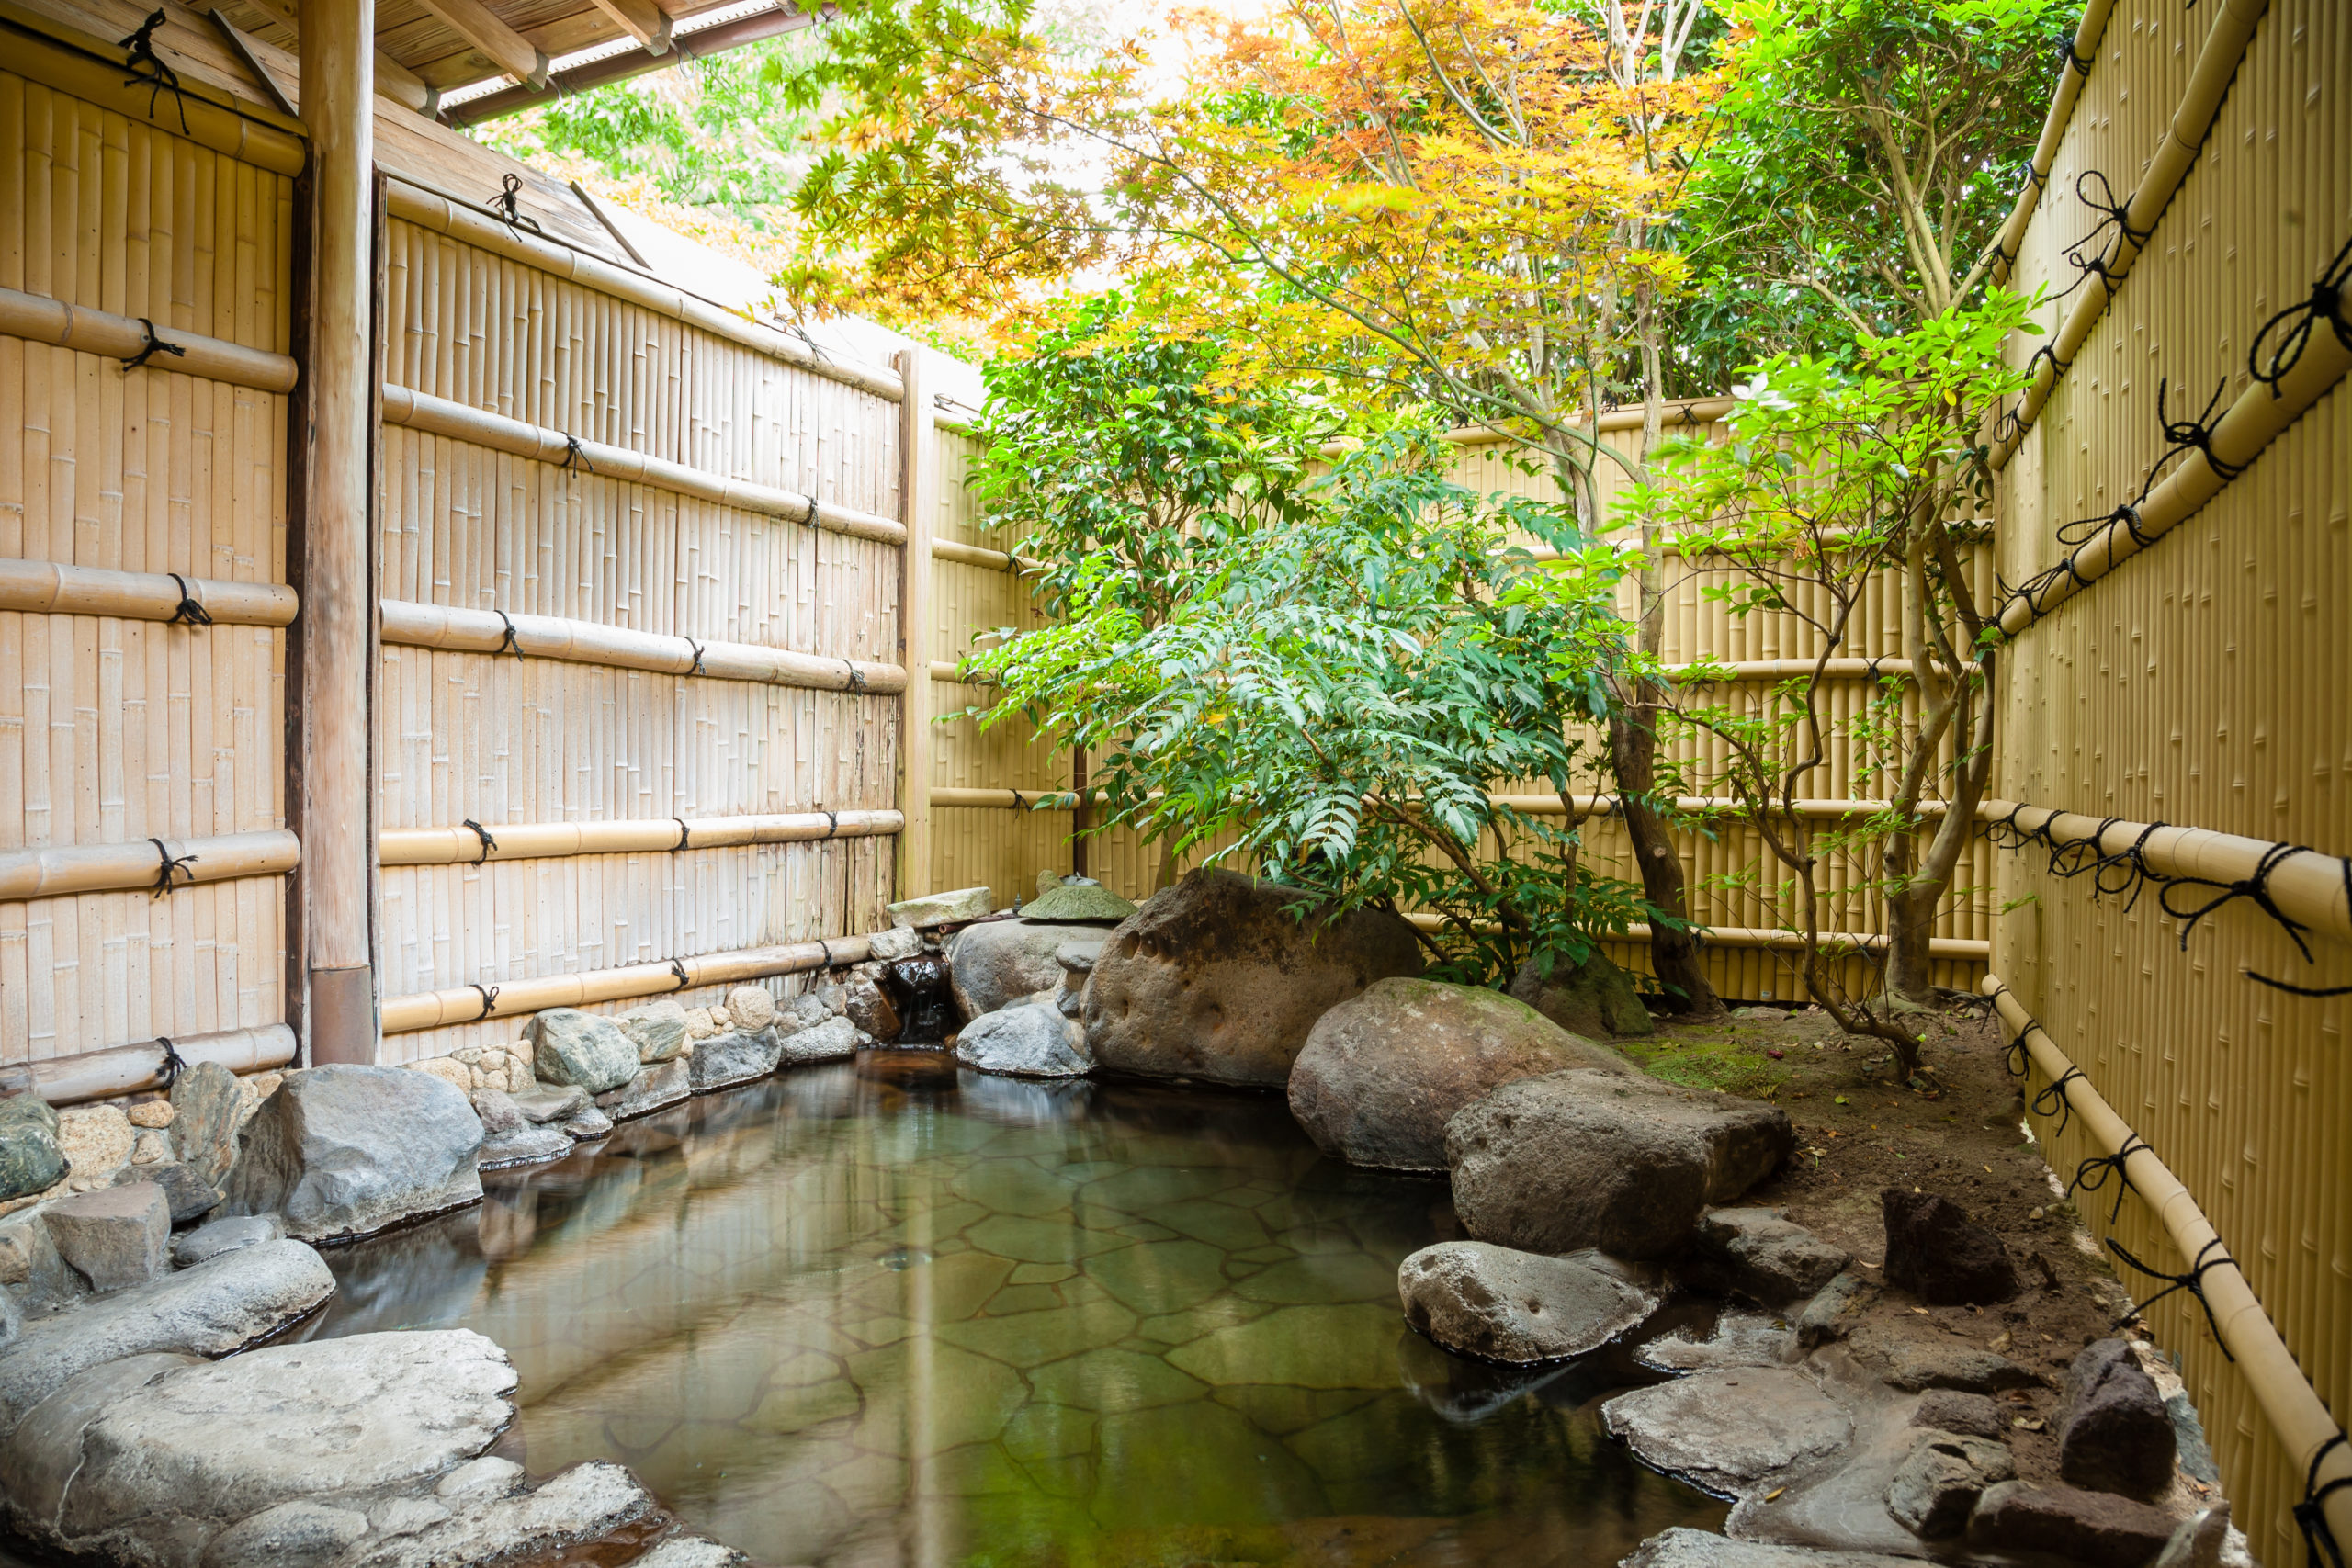 Traditional Japanese 'onsen' inspired pools, with serene natural surroundings, wooden architecture, and soothing thermal waters, offering a tranquil and rejuvenating experience.